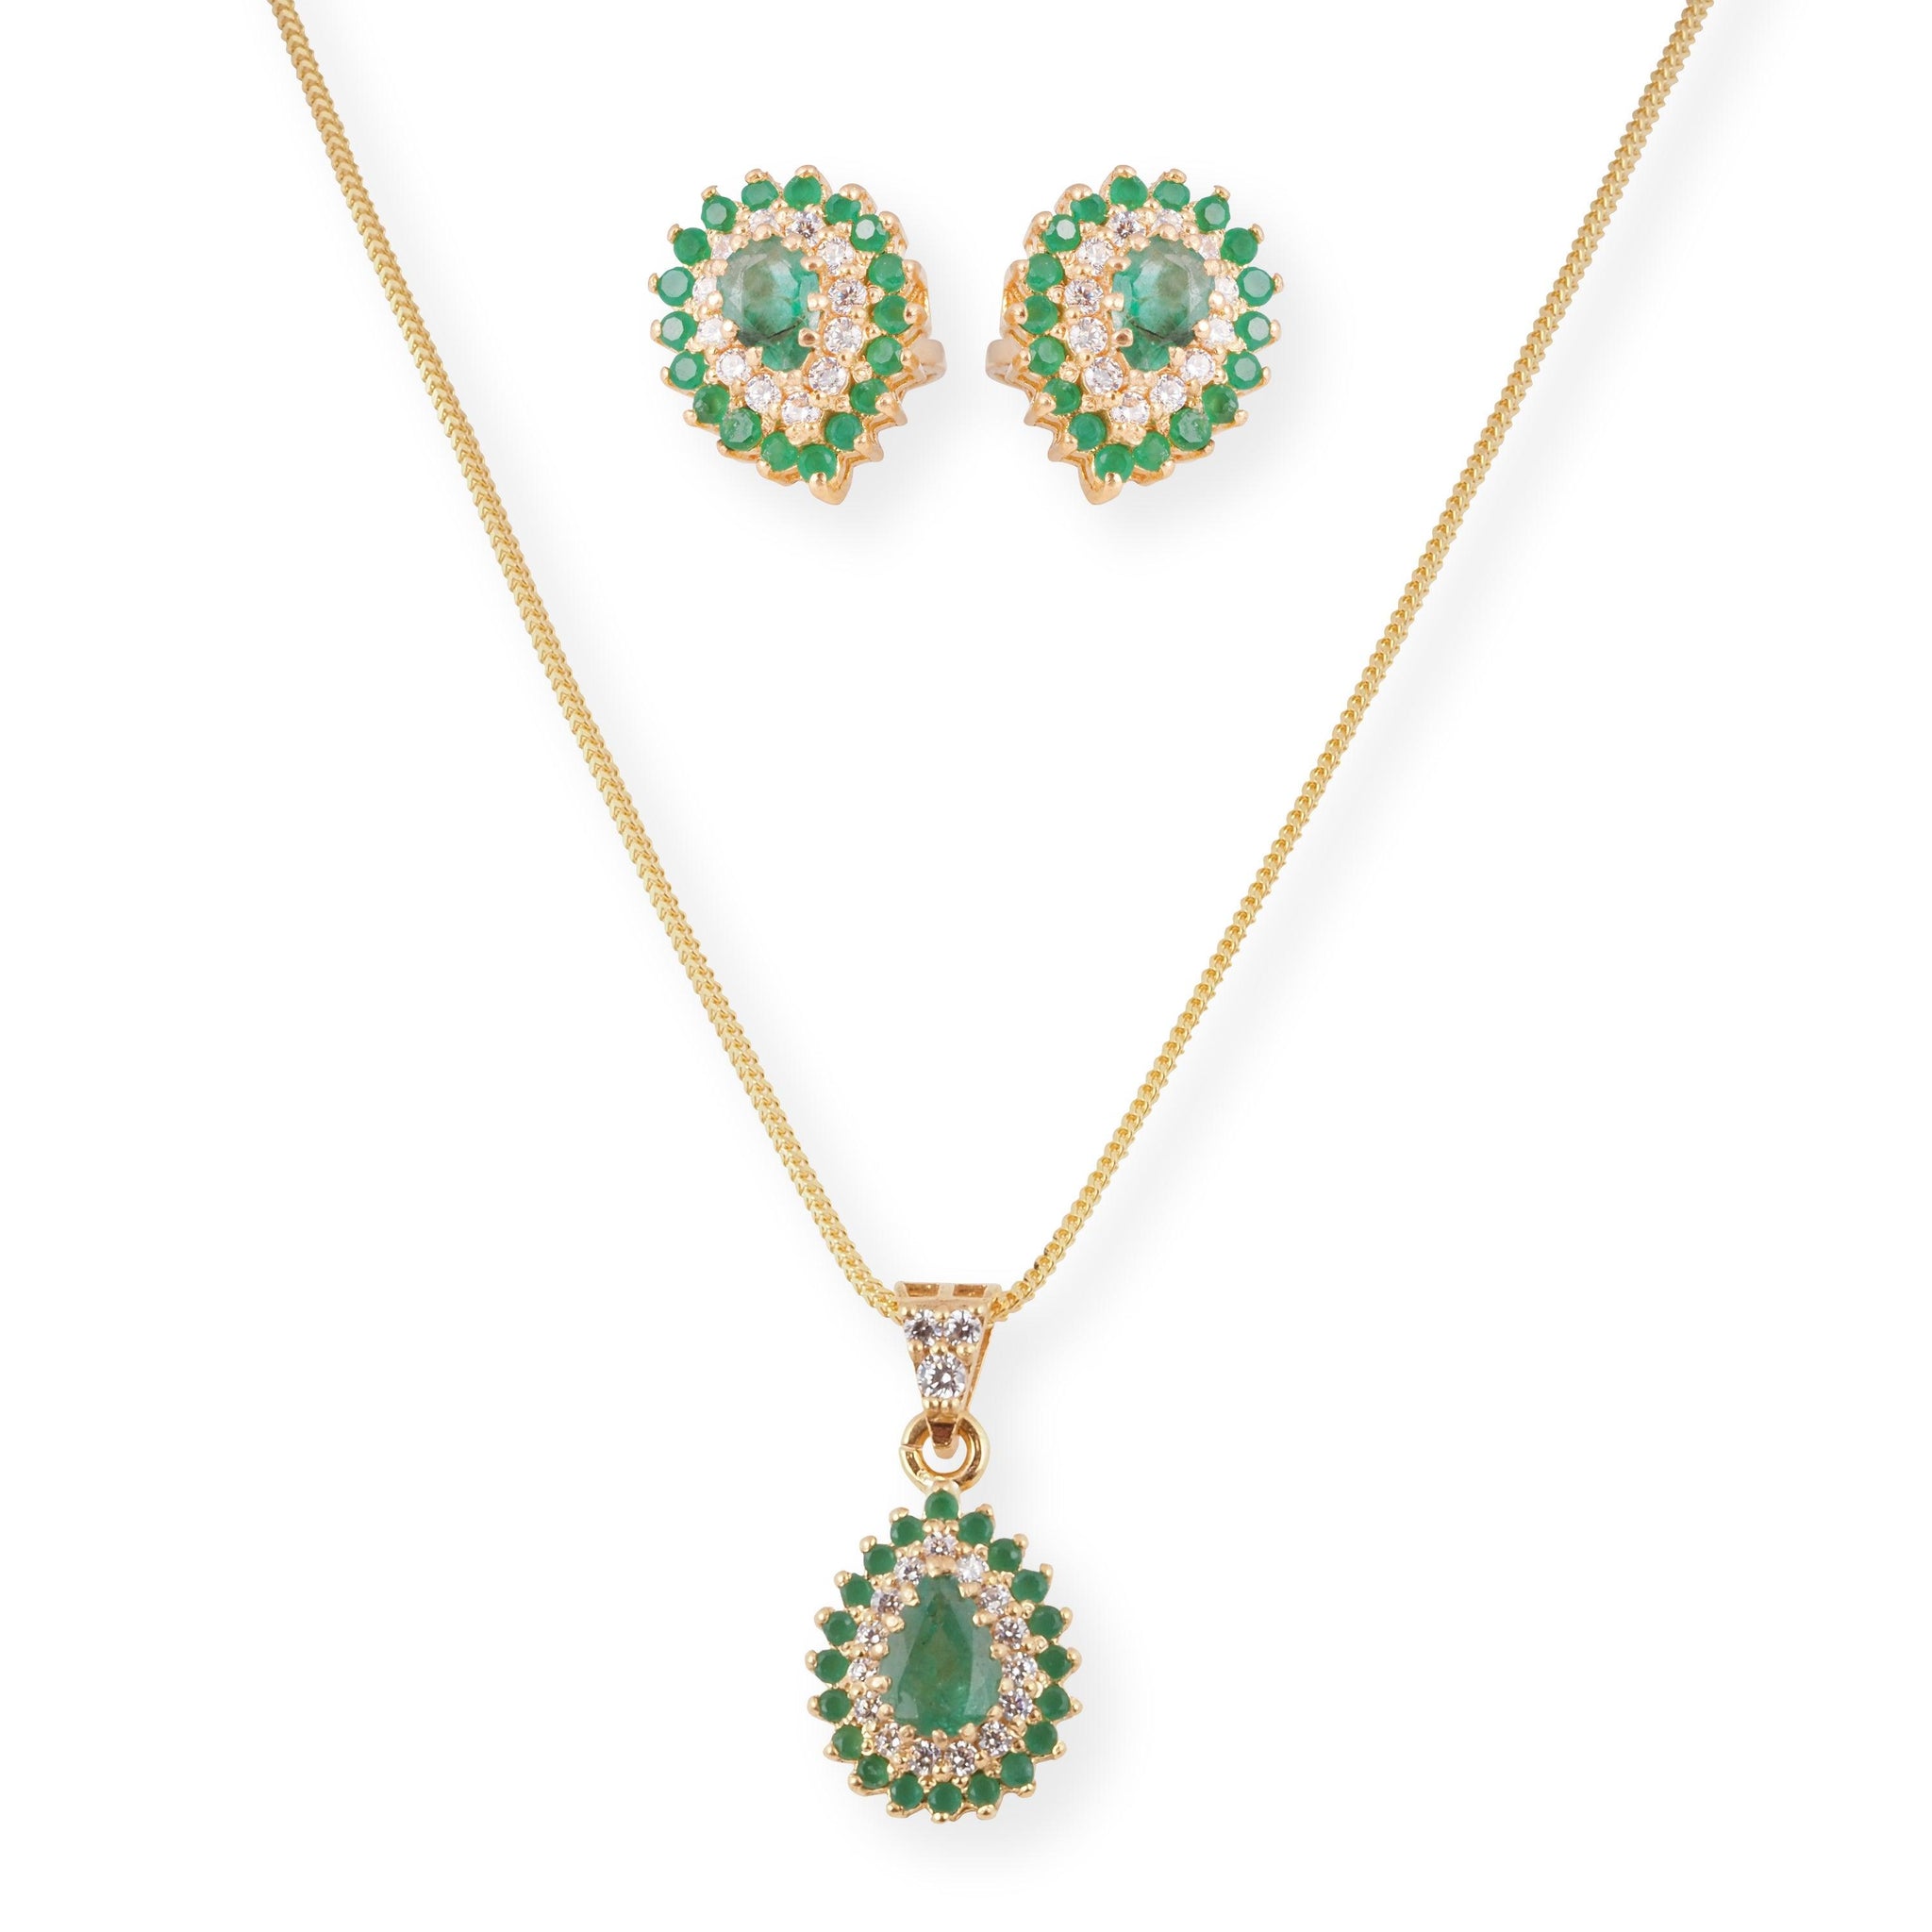 22ct Gold Set with Green and Cubic Zirconia Stones (Pendant + Chain + Earrings) PE-8010